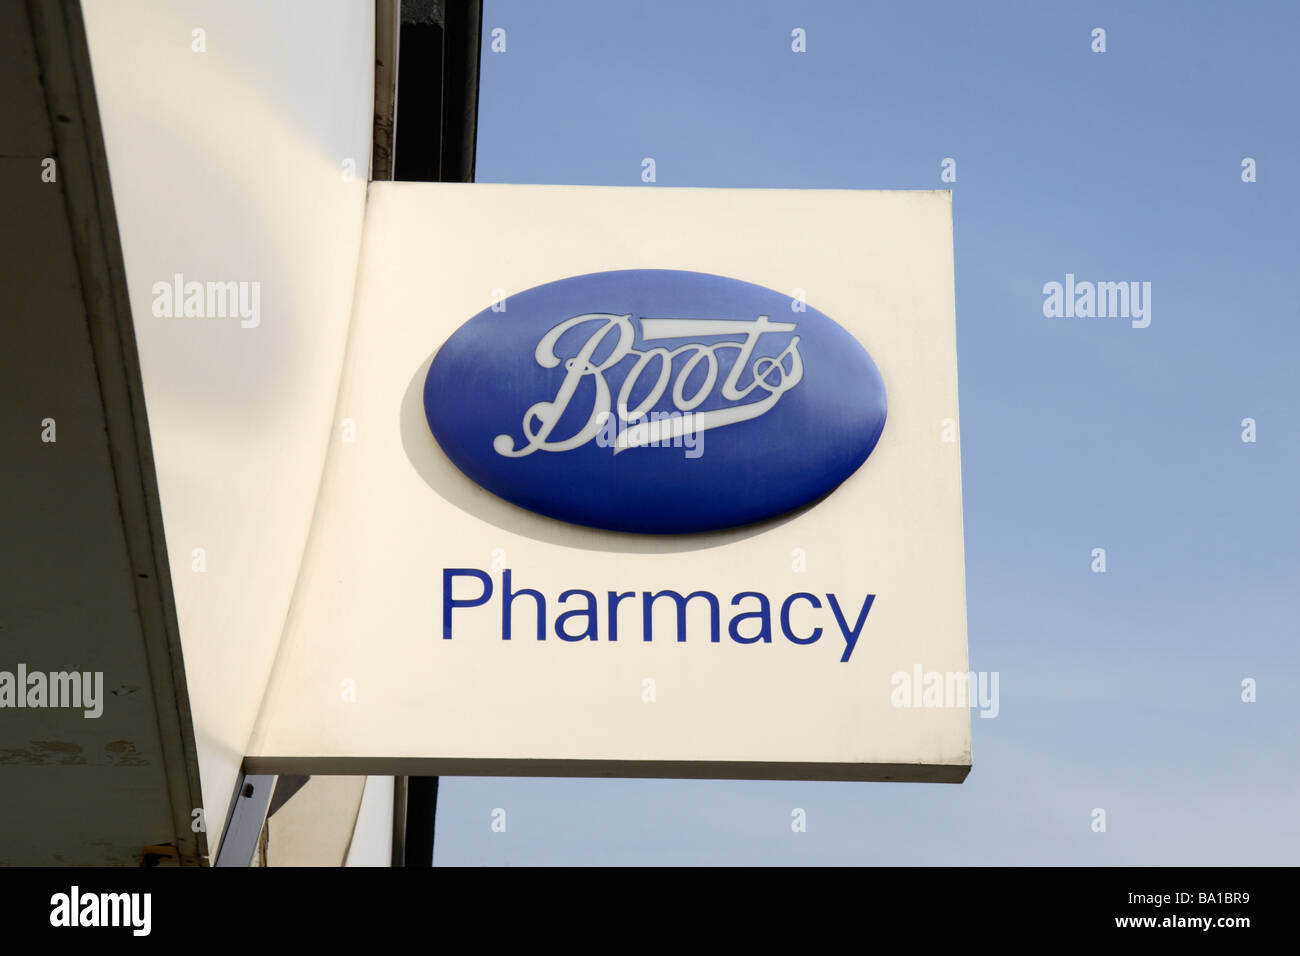 The sign above the Boots Pharmacy shop in Richmond Surrey, UK.   March 2009 Stock Photo